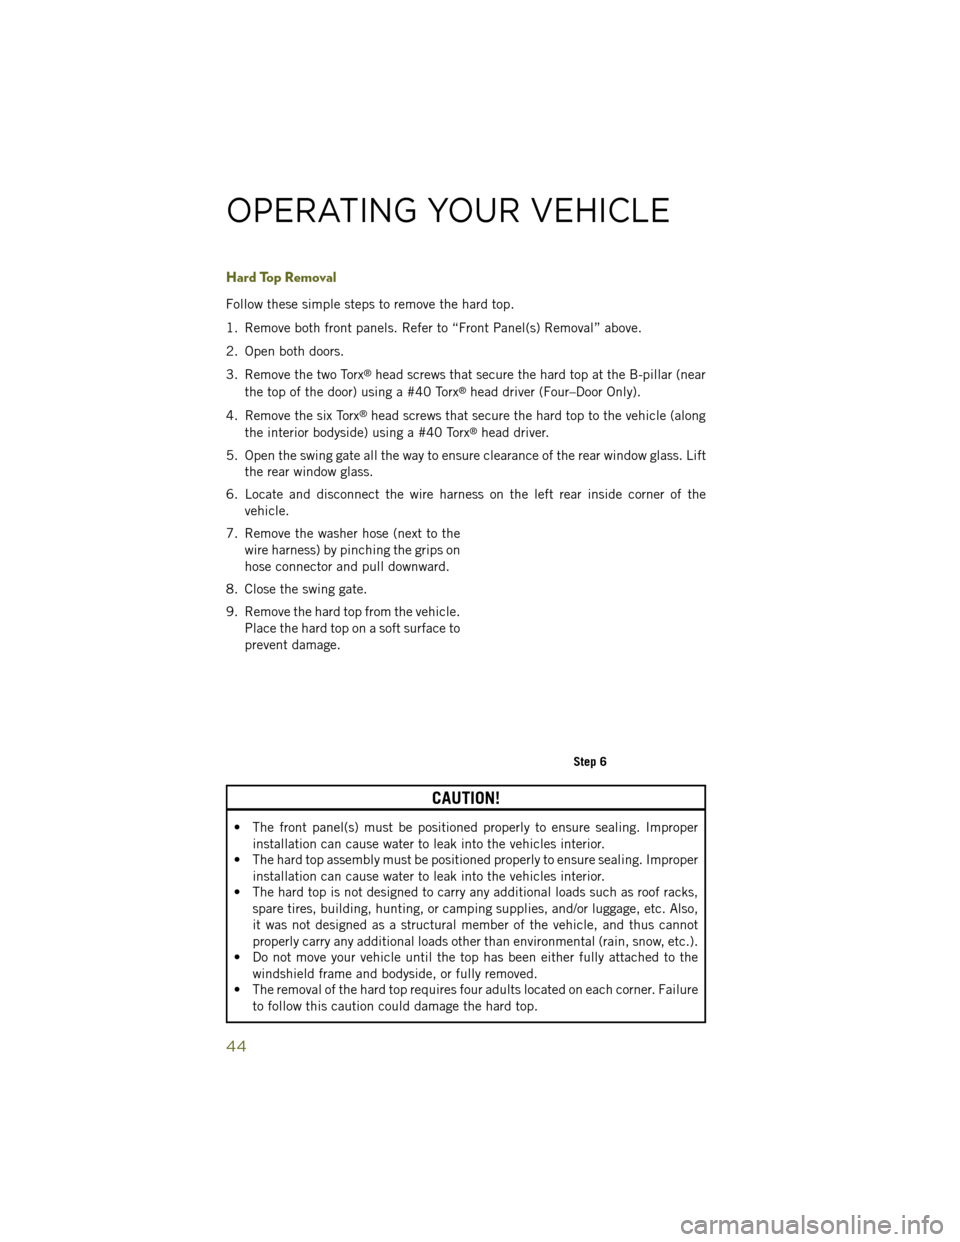 JEEP WRANGLER 2014 JK / 3.G Service Manual Hard Top Removal
Follow these simple steps to remove the hard top.
1. Remove both front panels. Refer to “Front Panel(s) Removal” above.
2. Open both doors.
3. Remove the two Torx
®head screws th